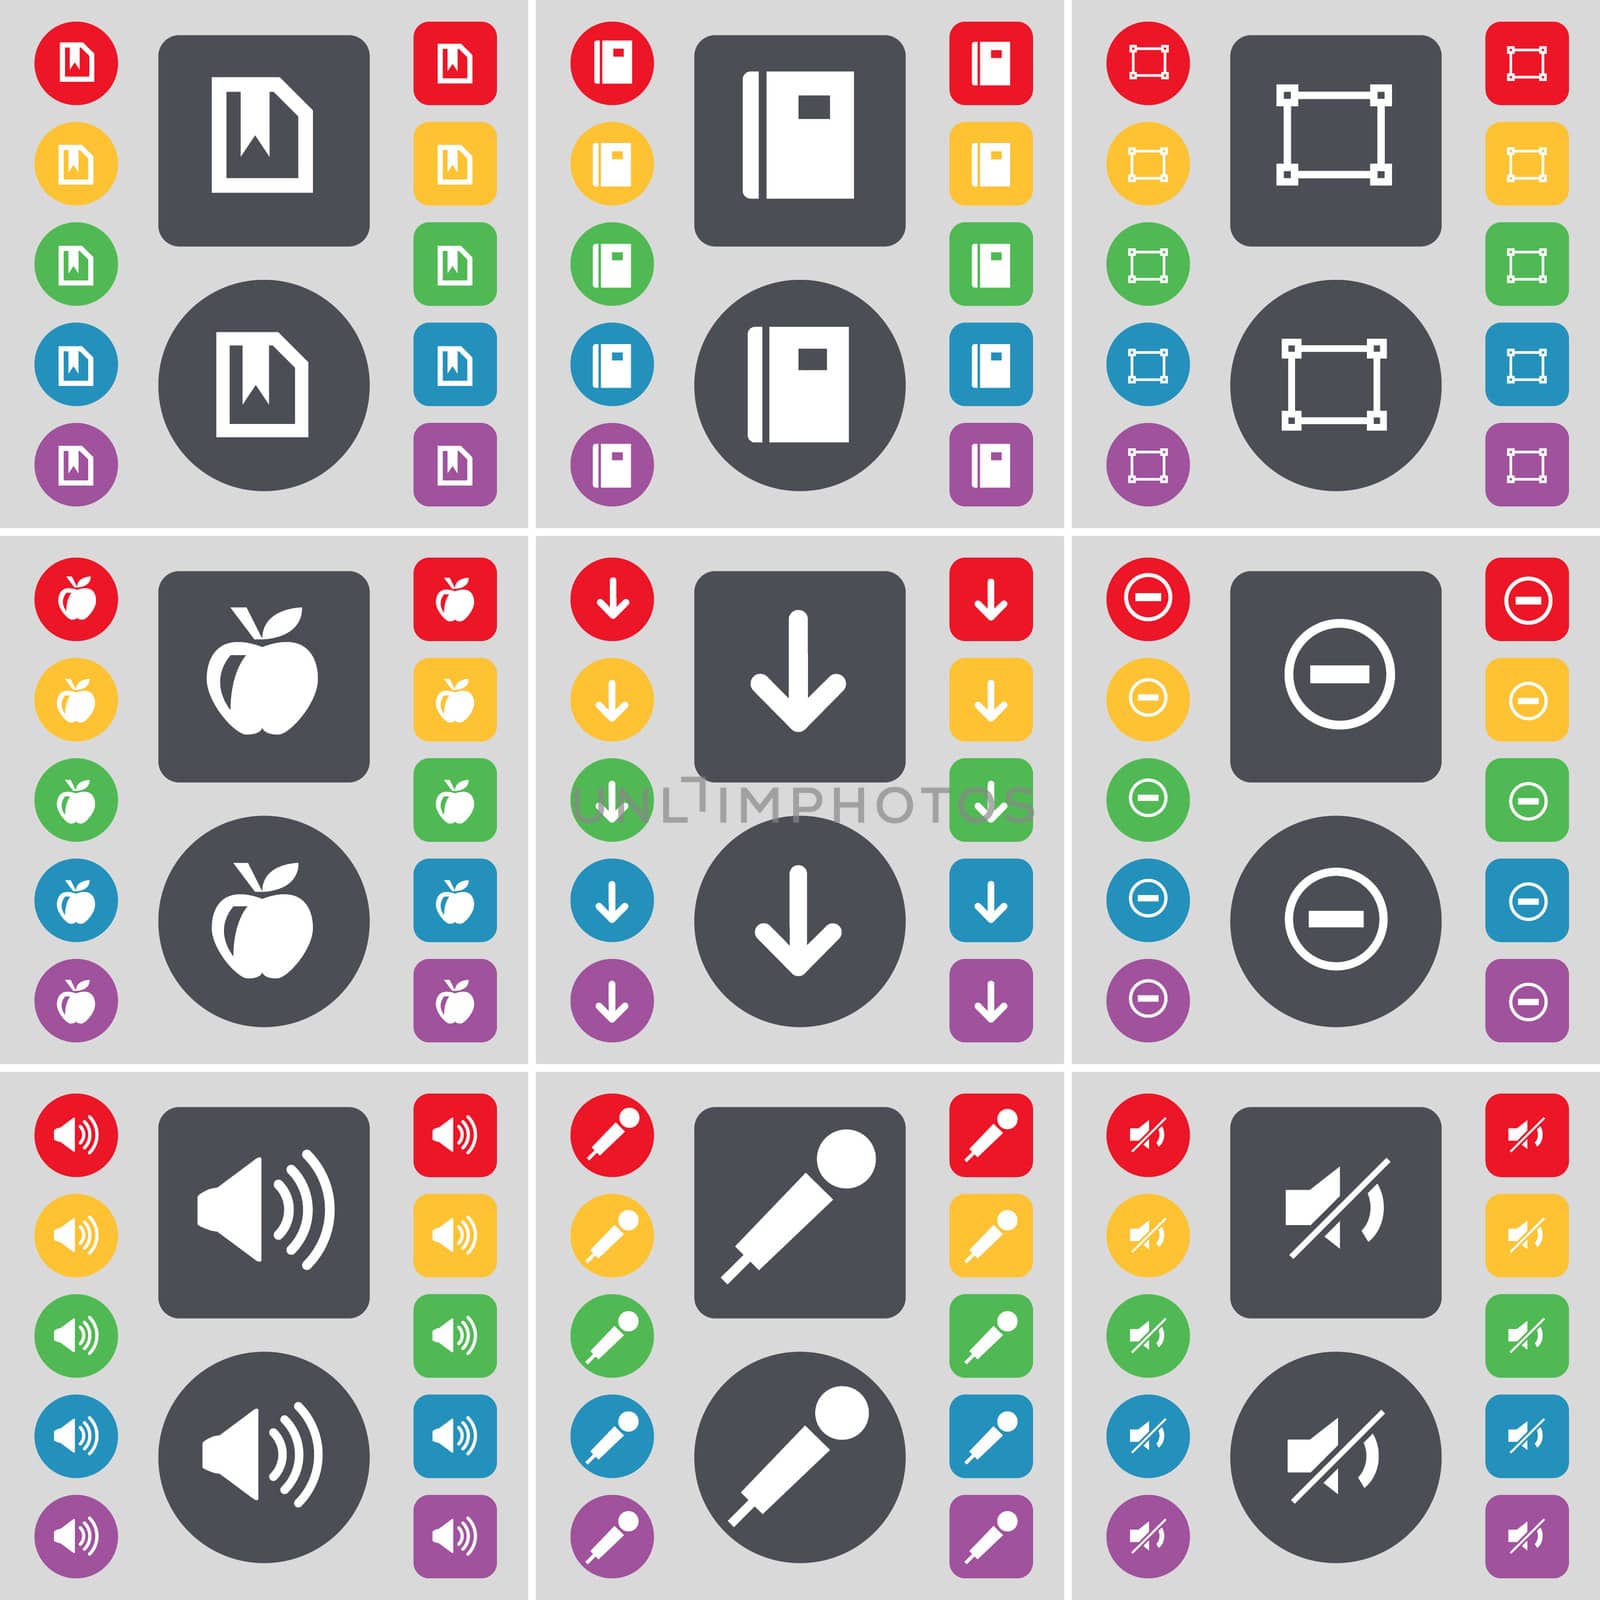 File, Notebook, Frame, Apple, Arrow down, Minus, Sound, Microphone, Mute icon symbol. A large set of flat, colored buttons for your design. illustration